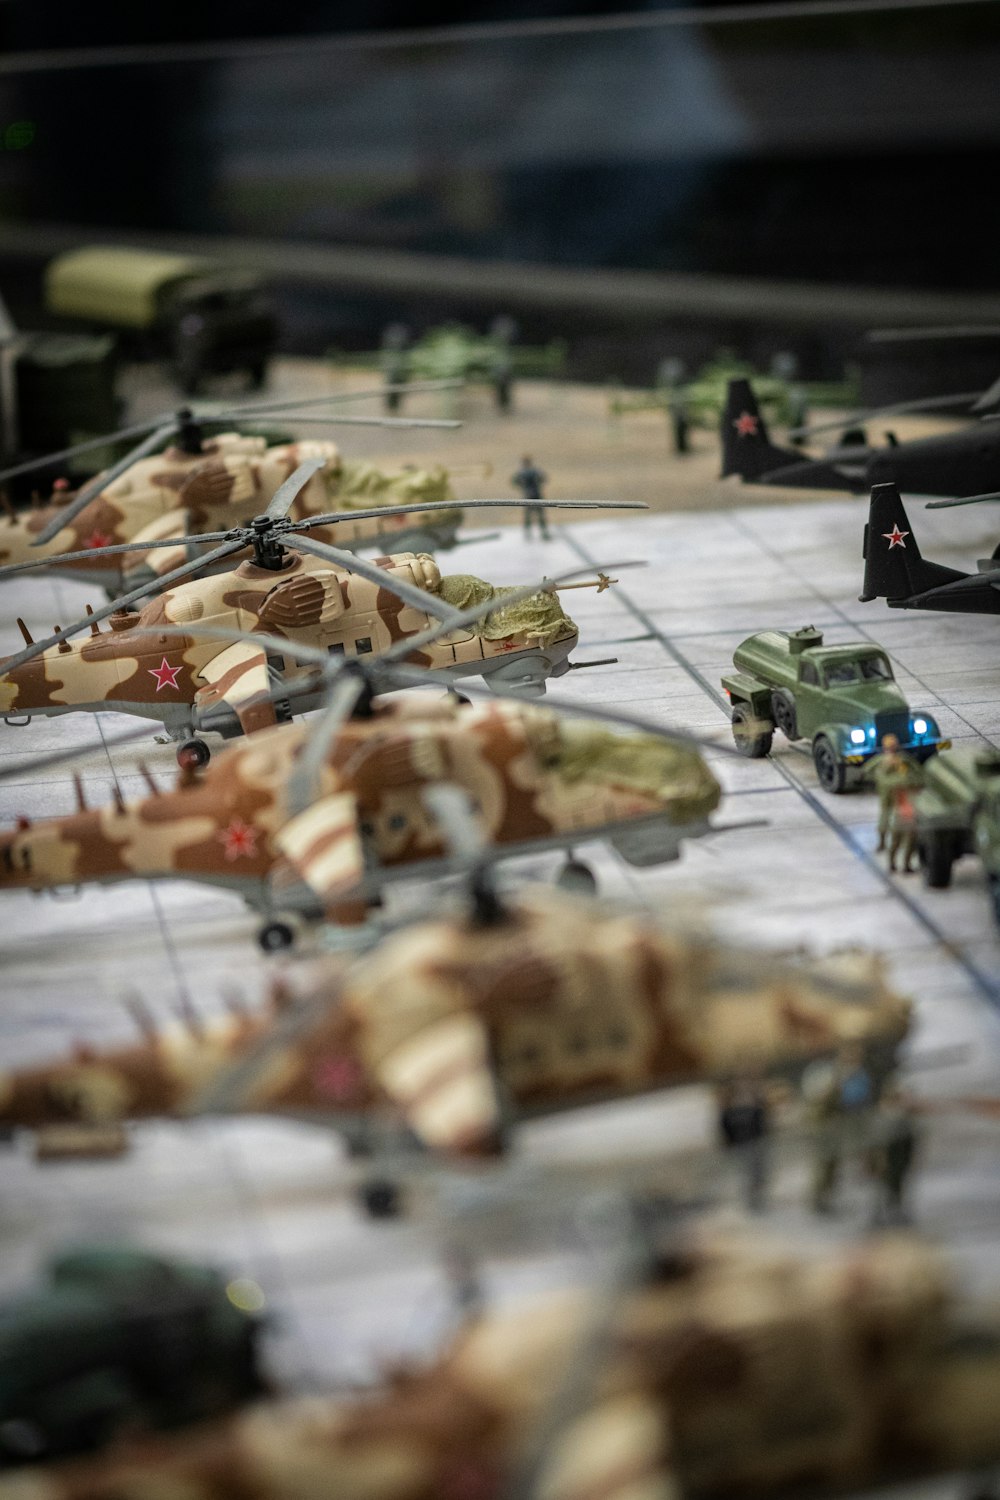 a group of toy army vehicles and helicopters on a table